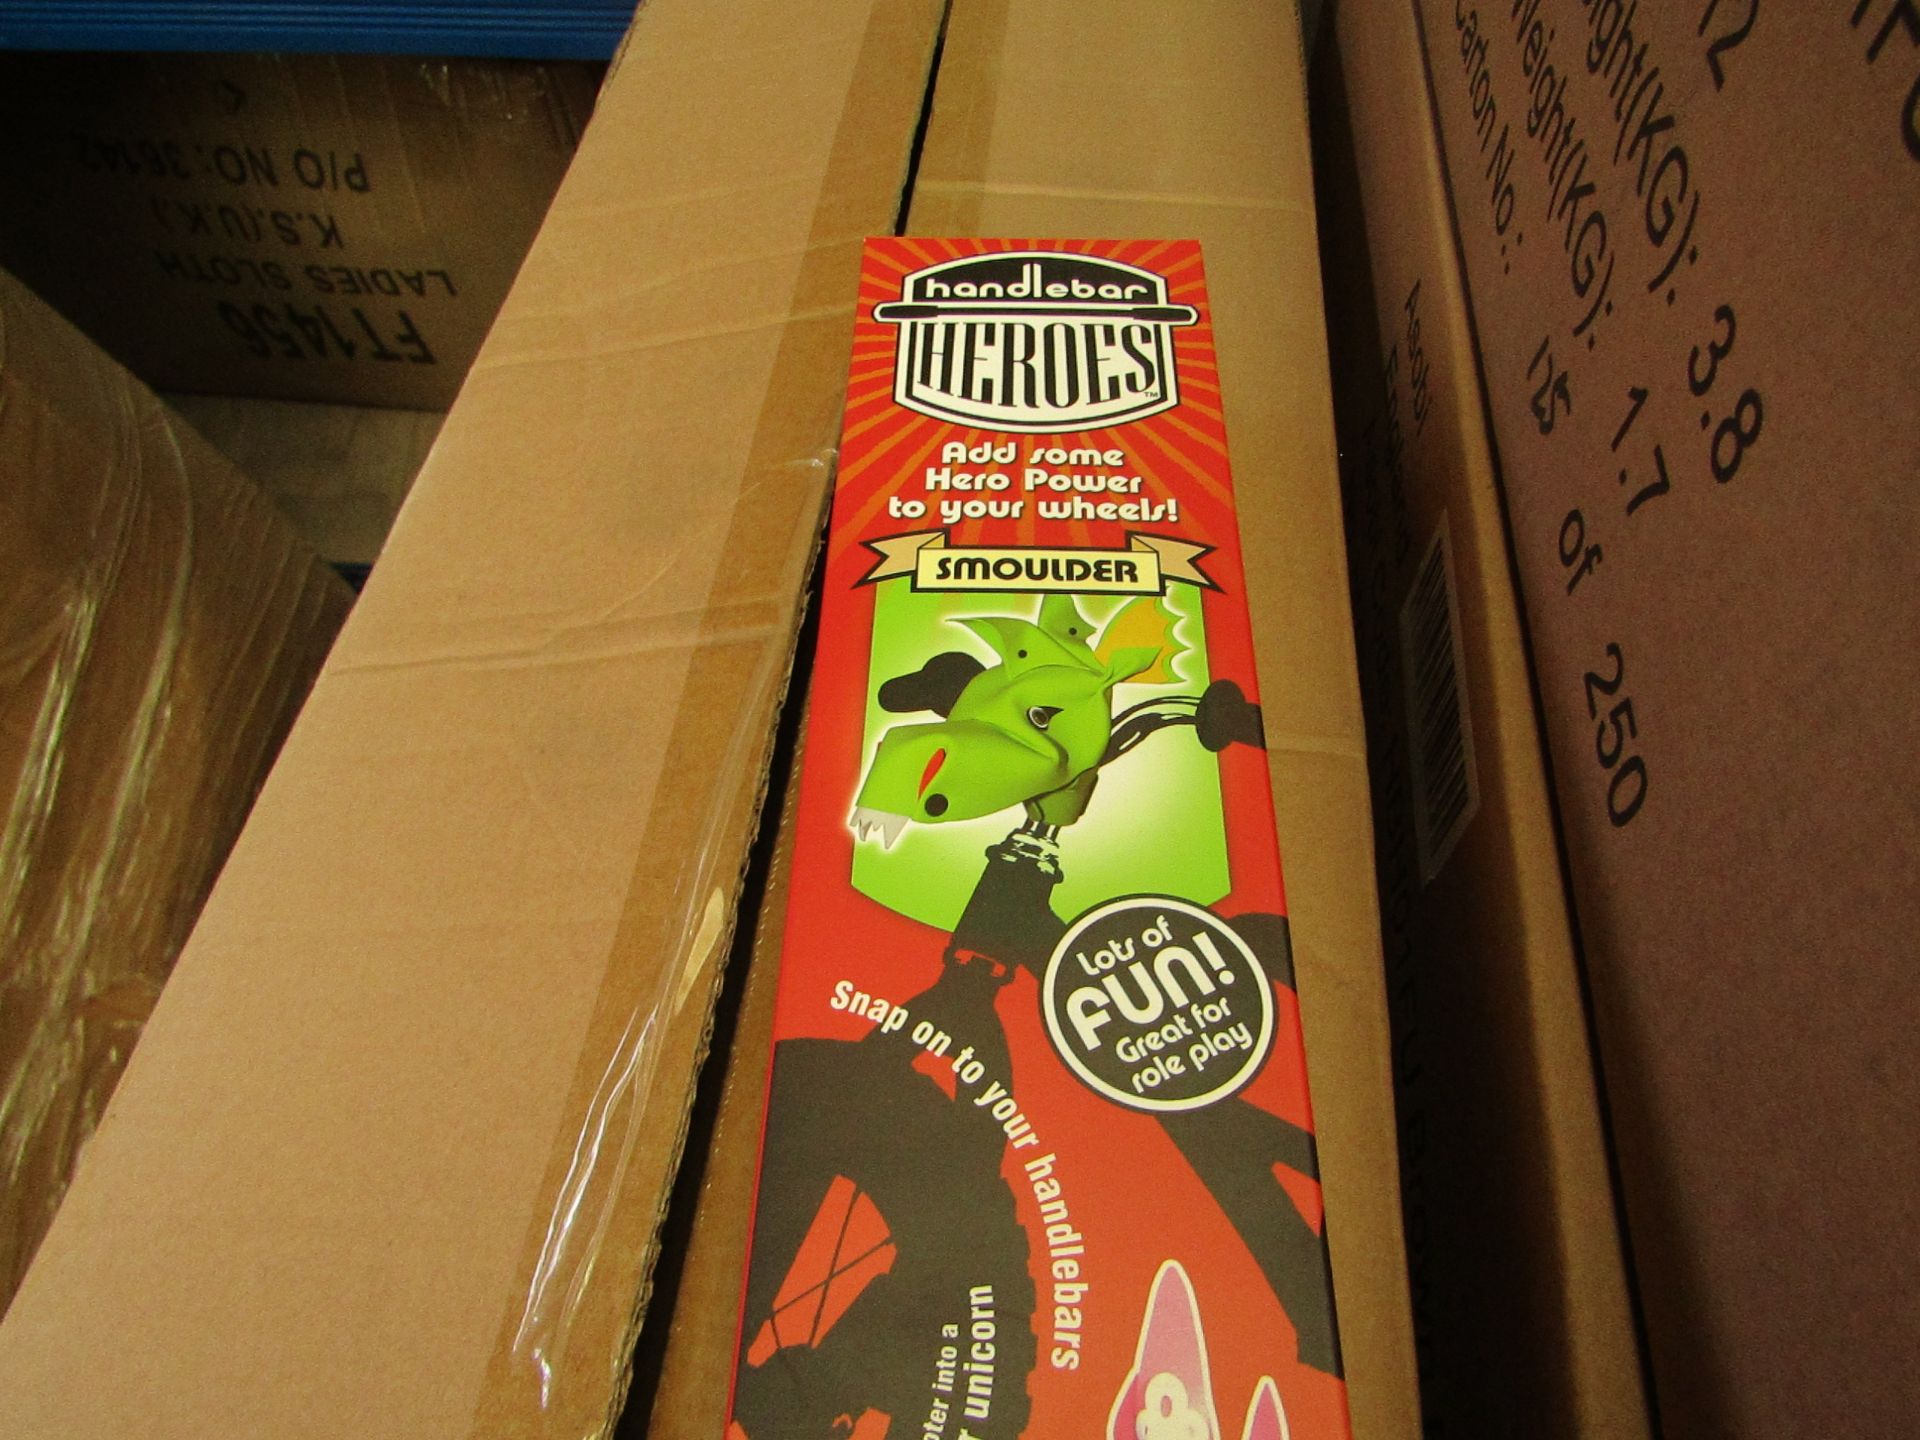 Handle Bar Heroes Smoulder Bike/Scooter Accessory. New & Boxed.